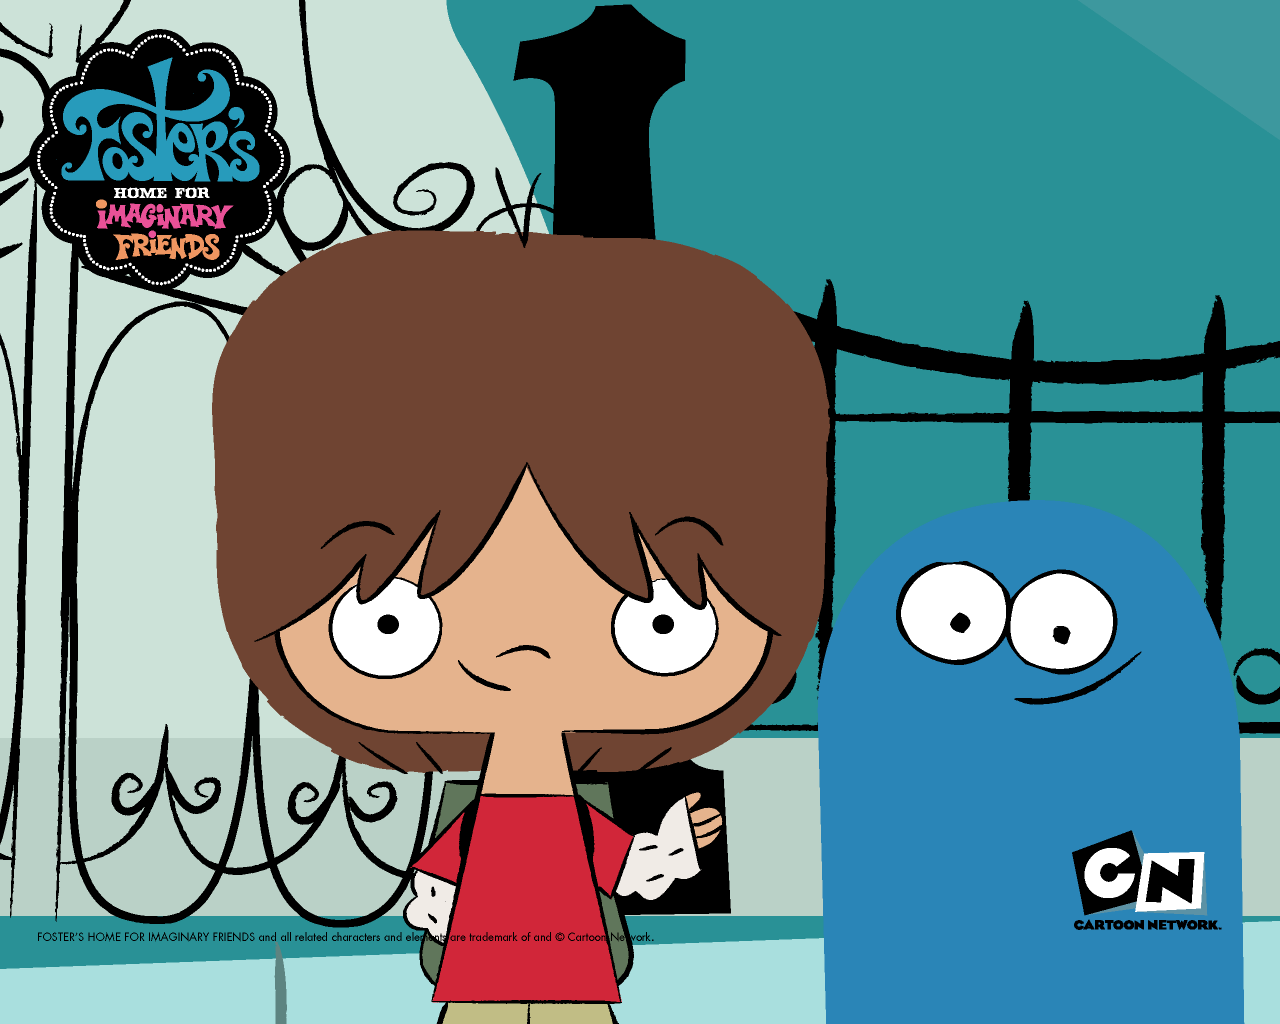 9. "Foster's Home for Imaginary Friends" - wide 7